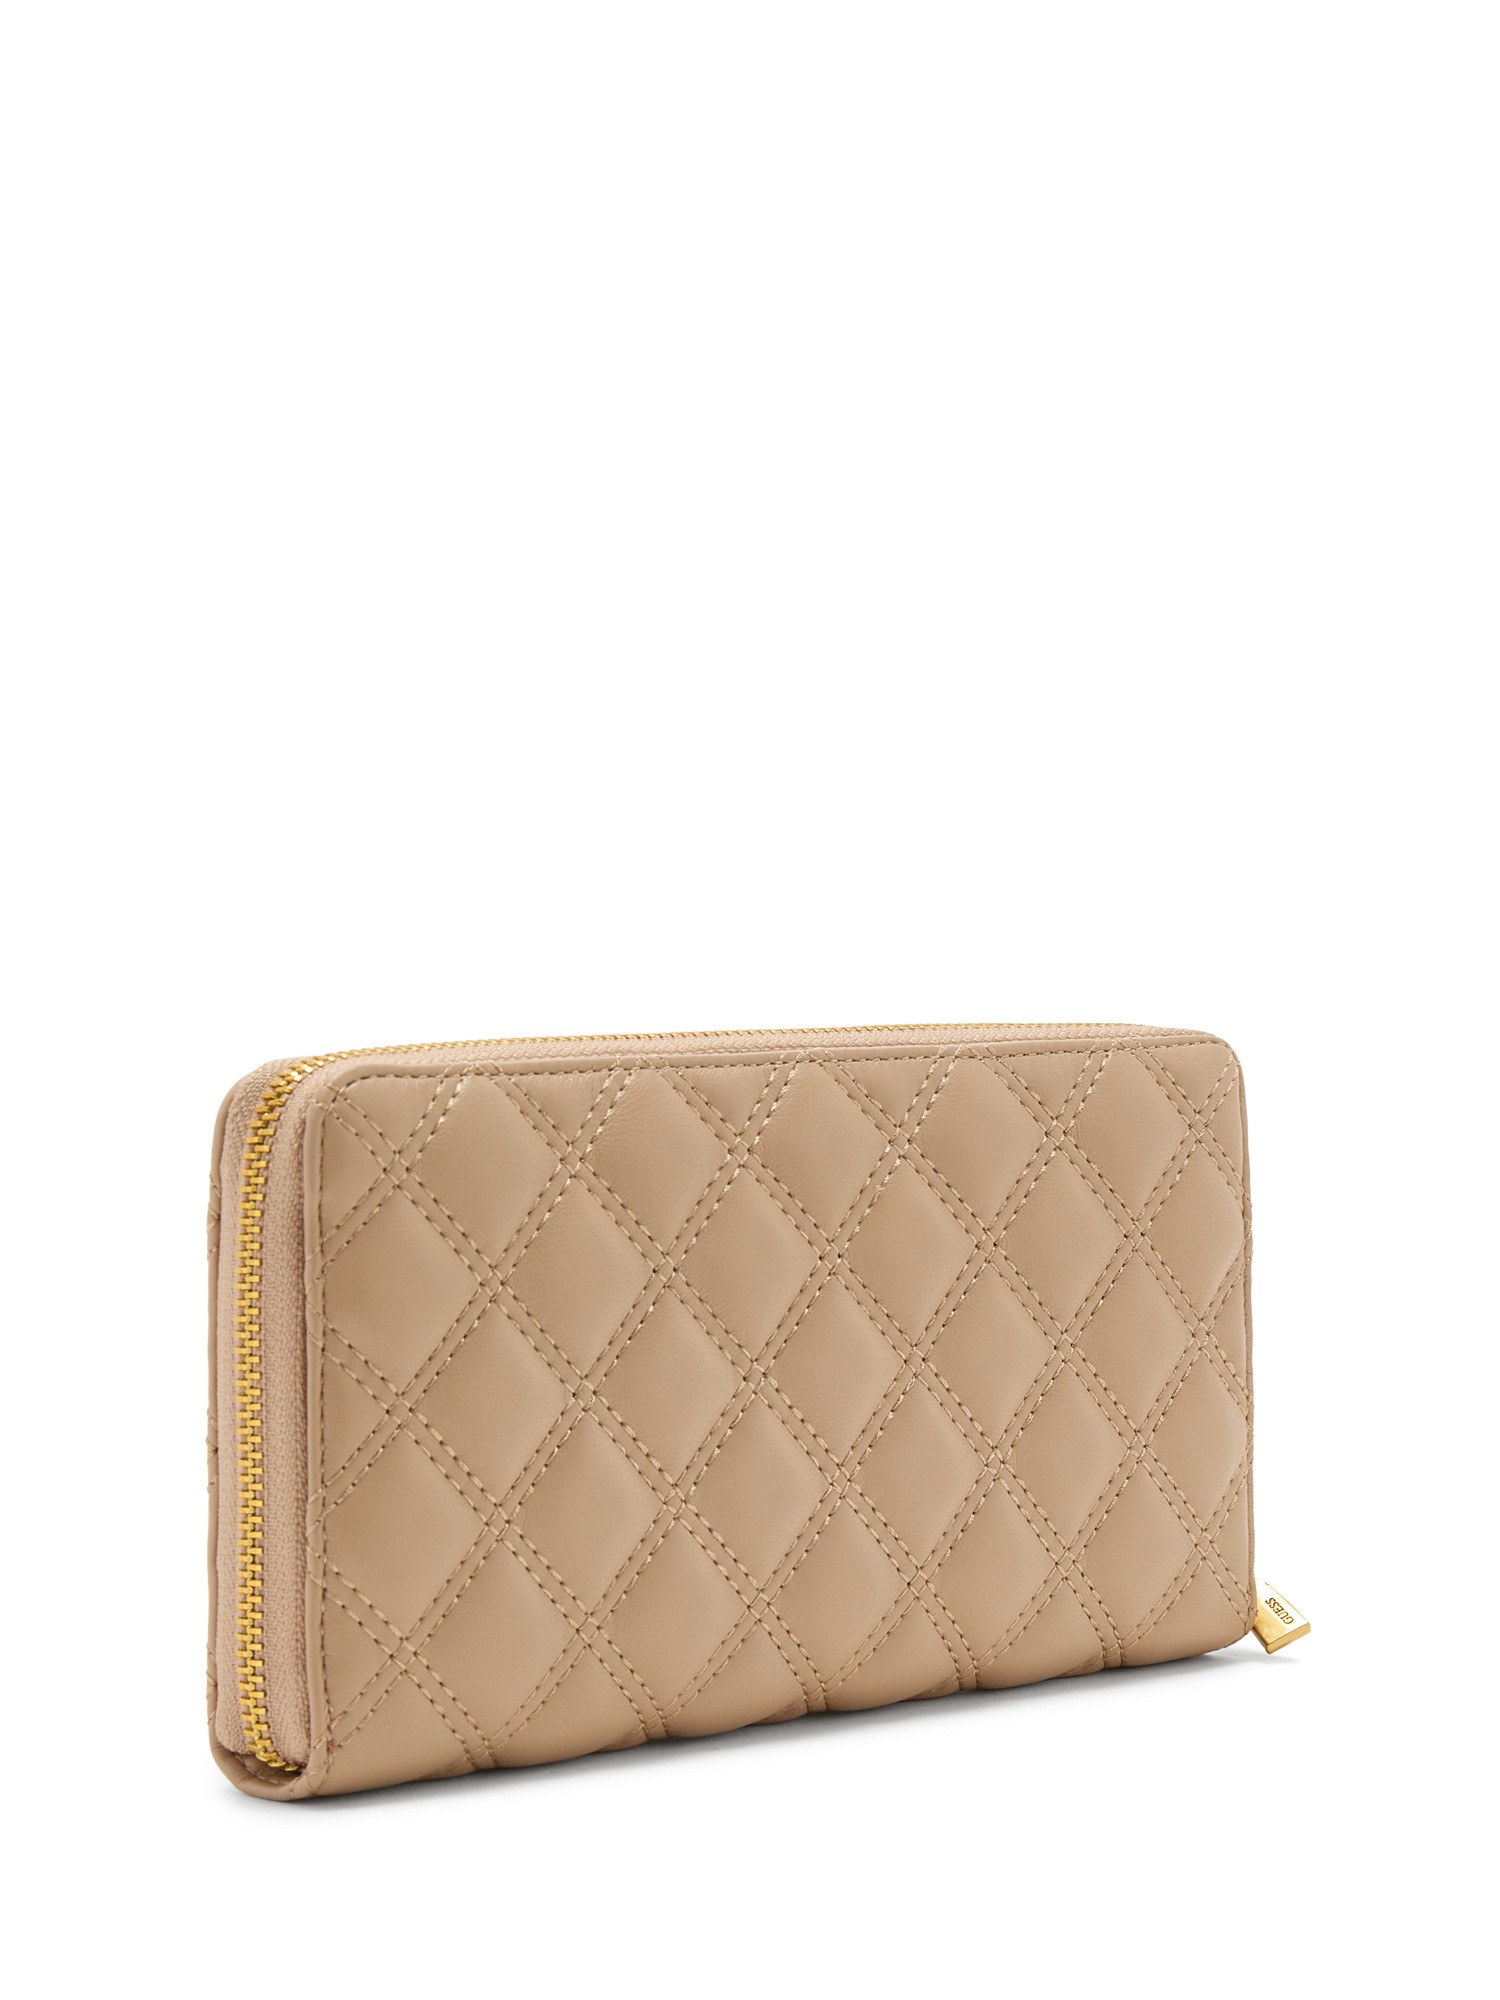 Guess - Giully maxi wallet, Beige, large image number 1